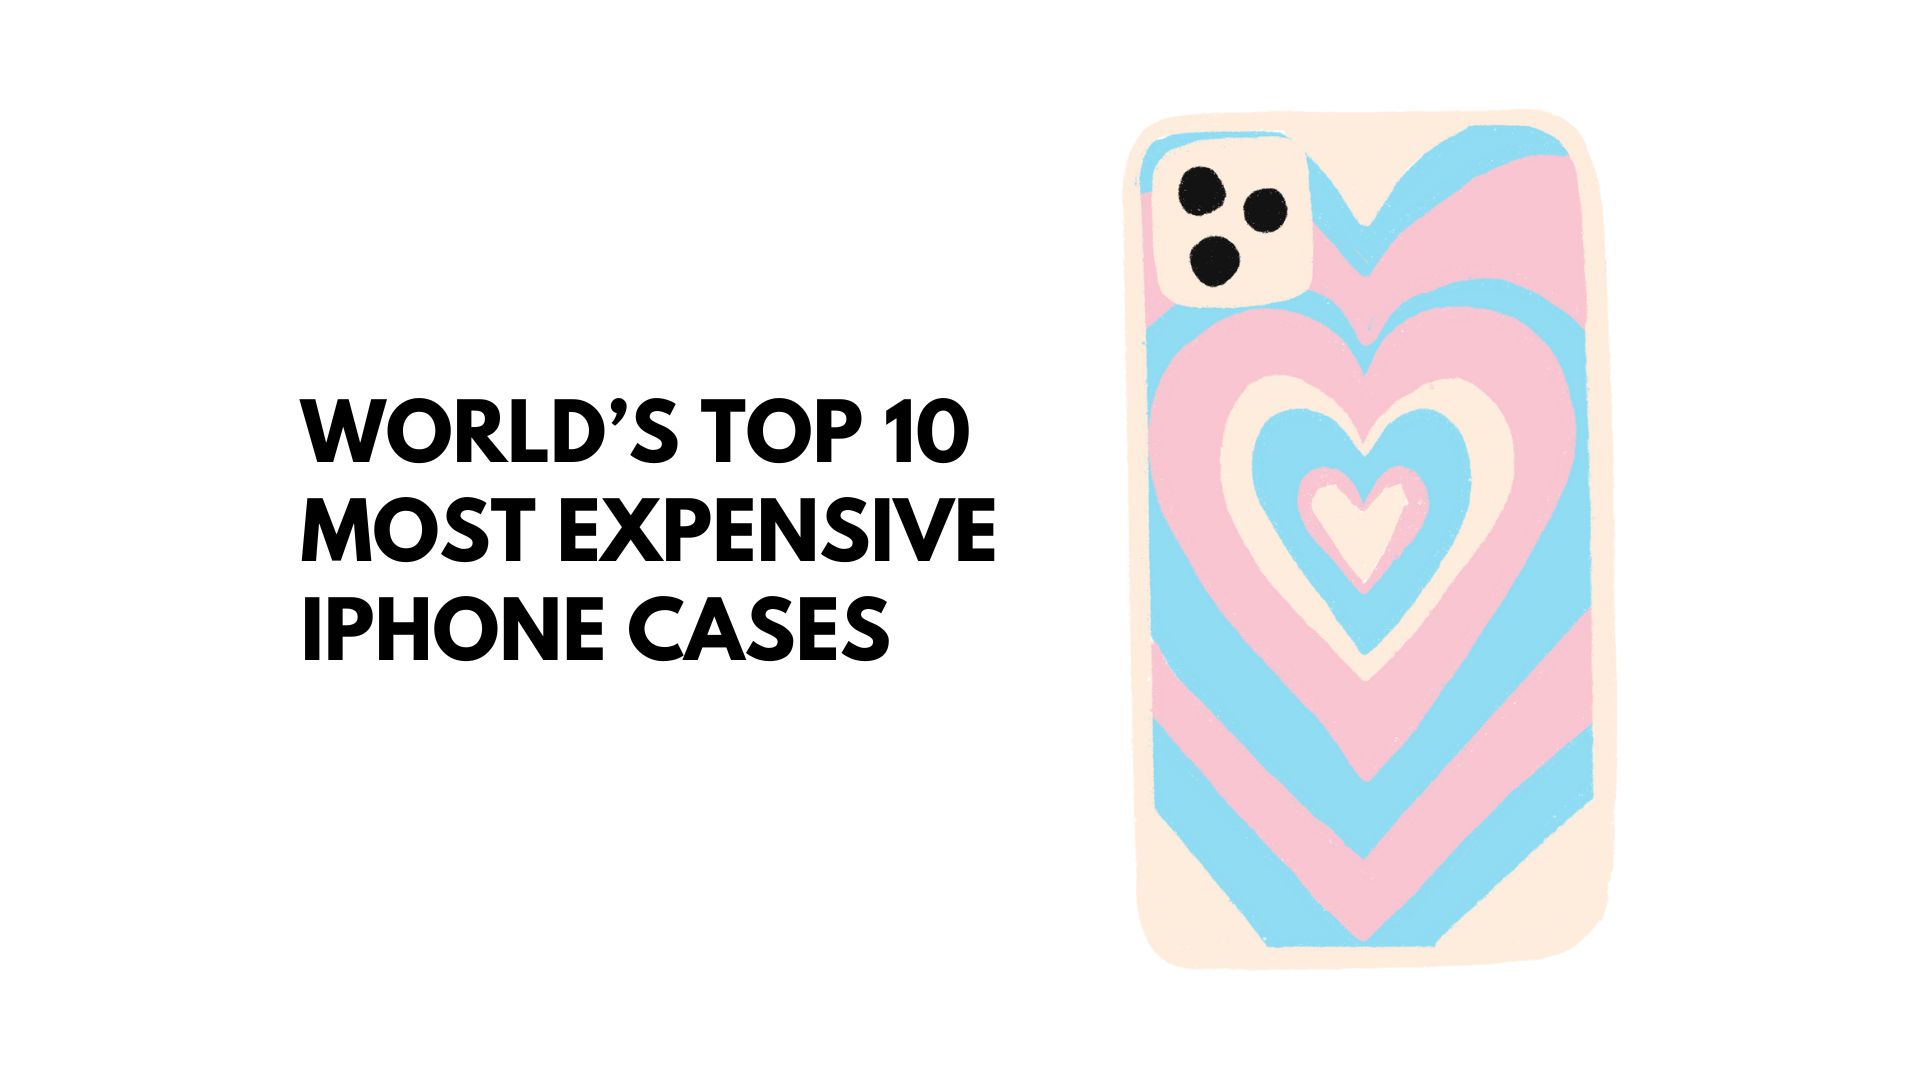 World’s Top 10 Most Expensive iPhone Cases